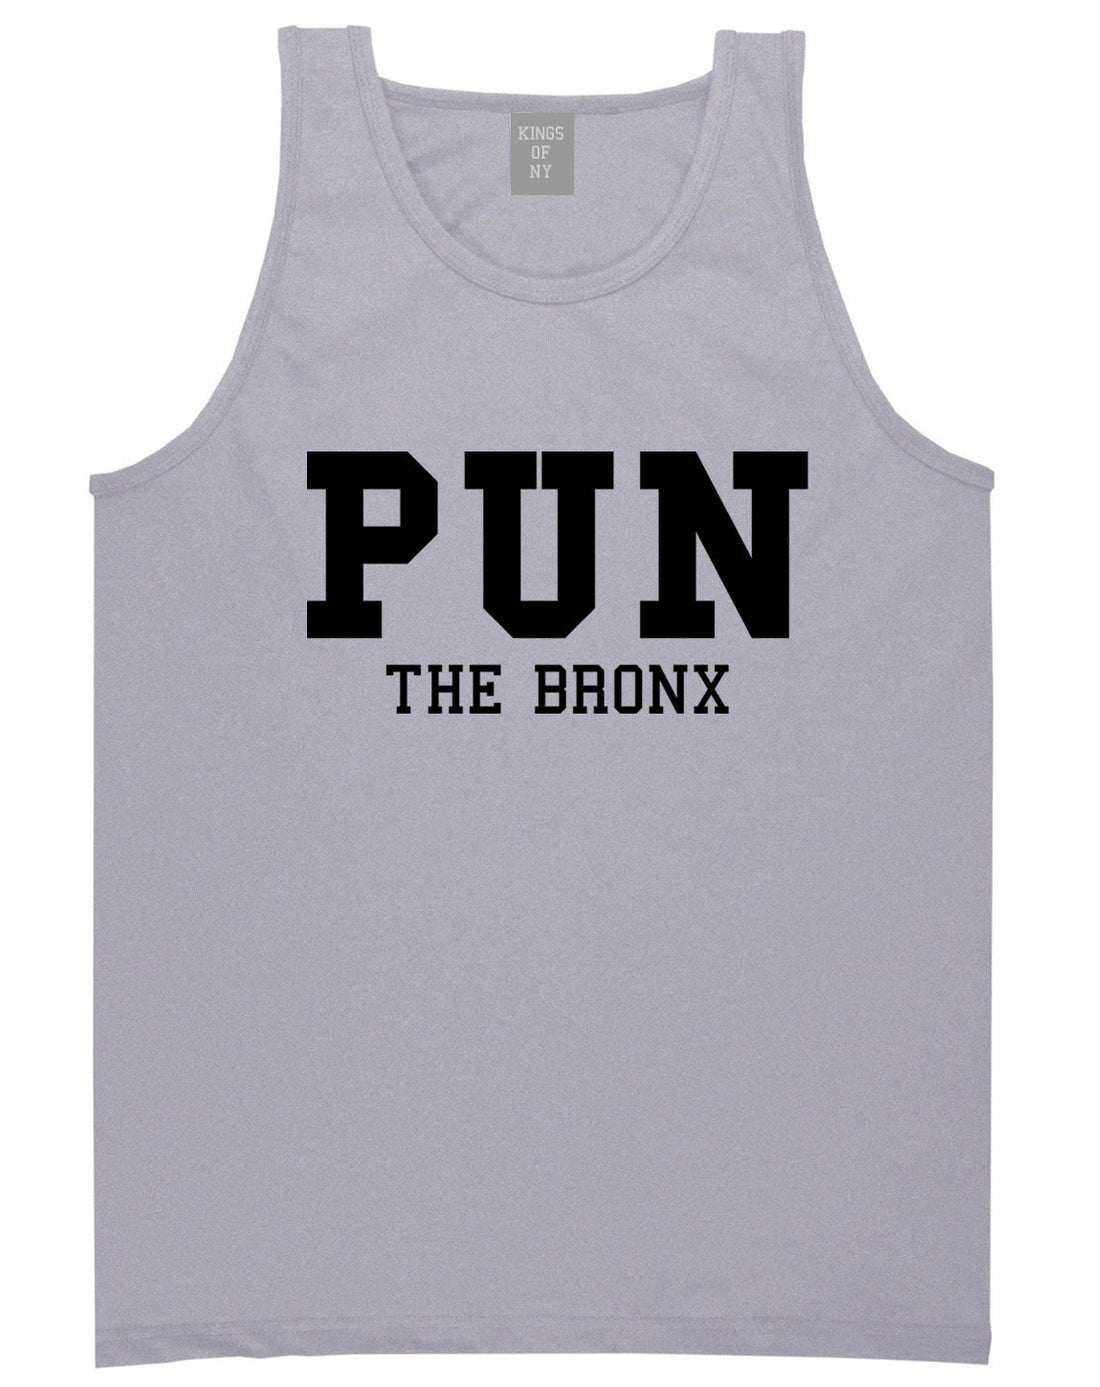 Pun The Bronx Tank Top in Grey by Kings Of NY